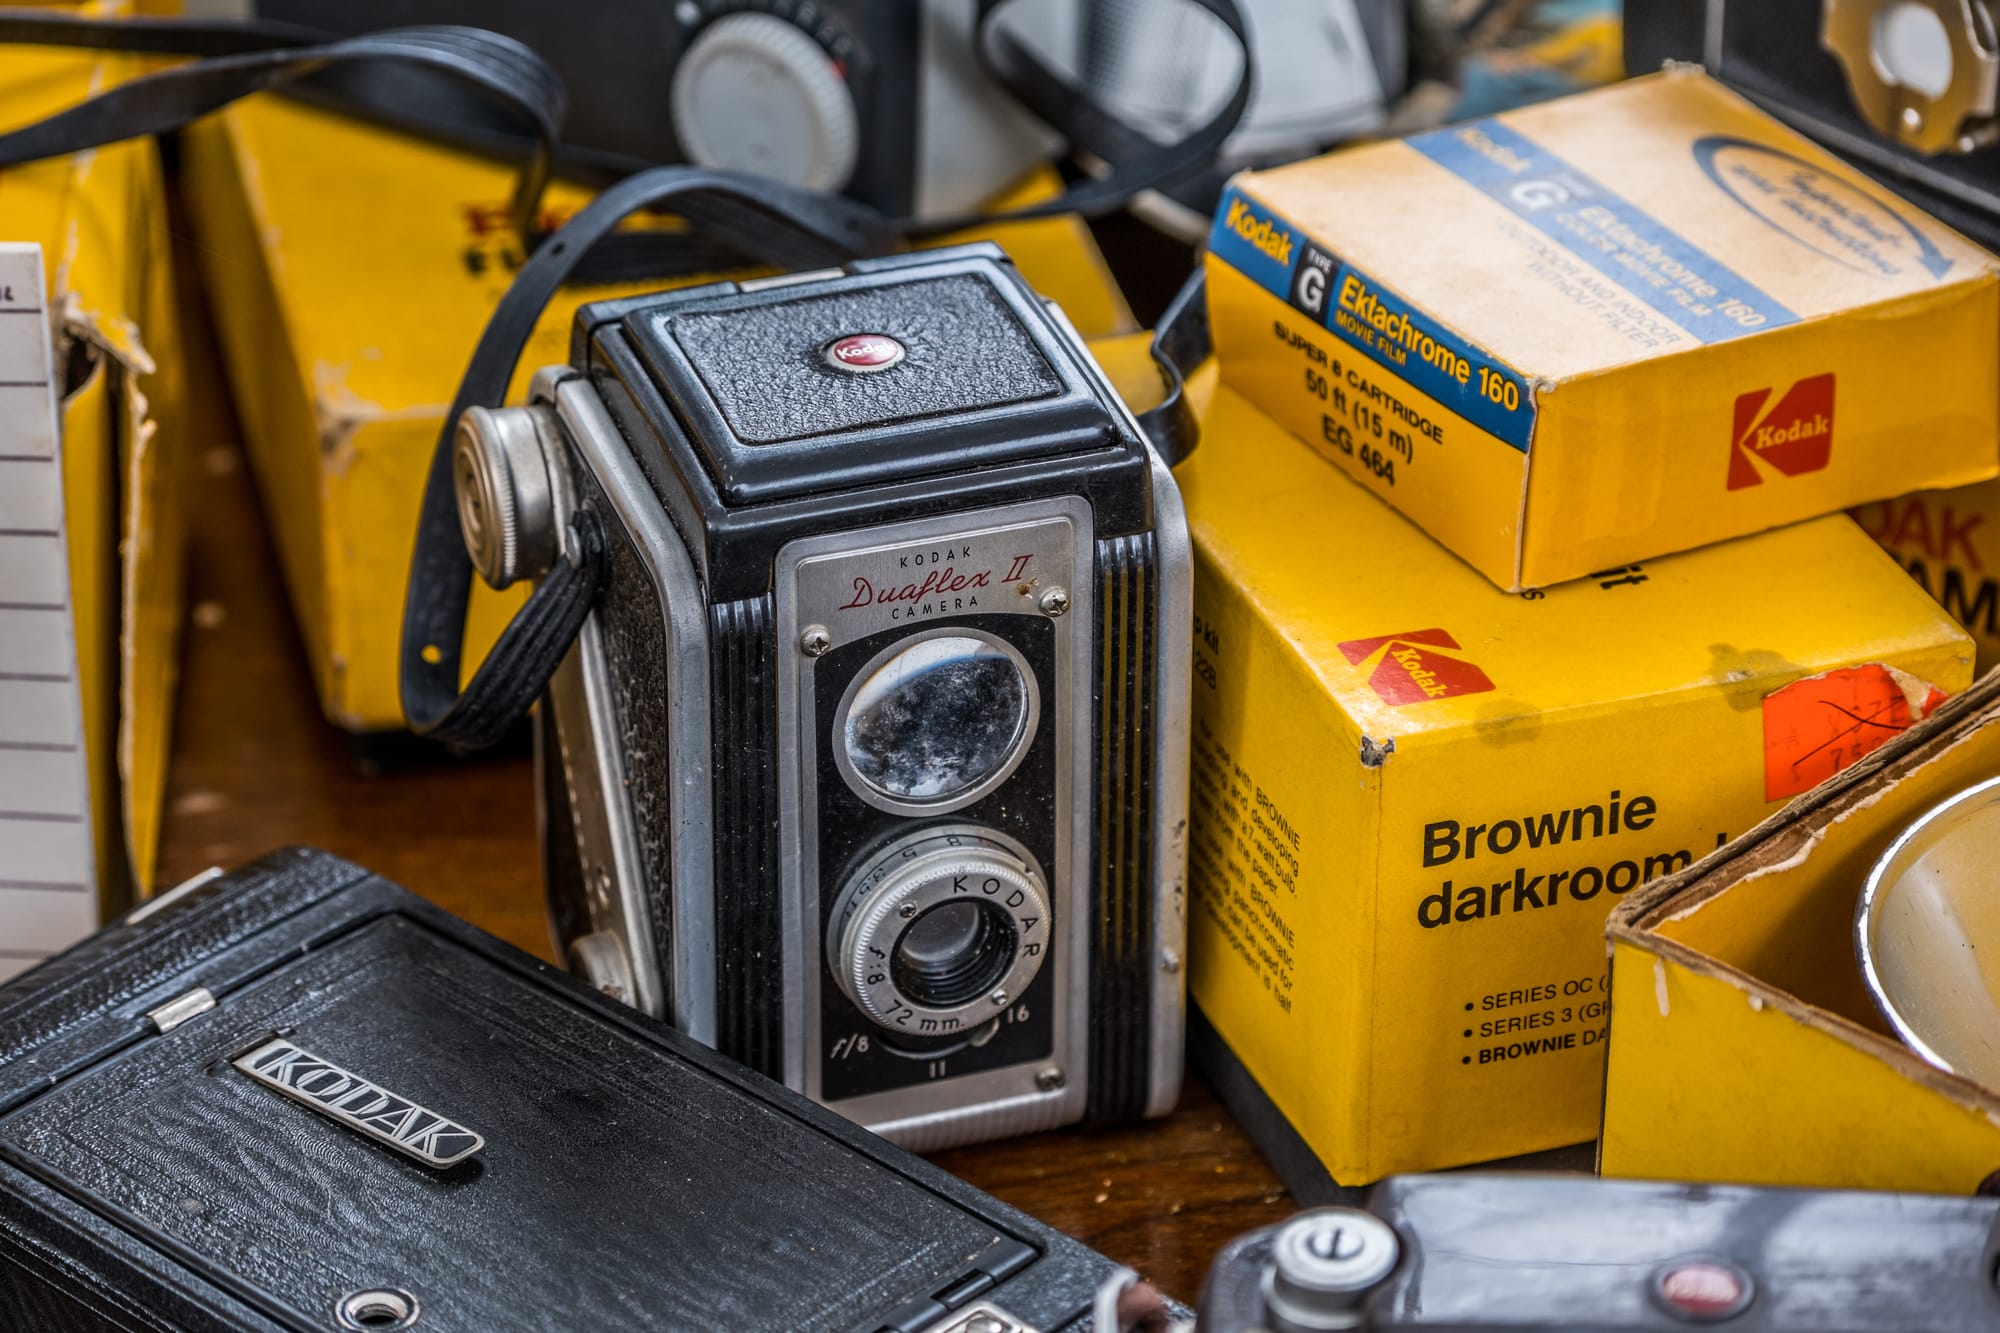 Camera Chat: The Invention of the First Digital Camera